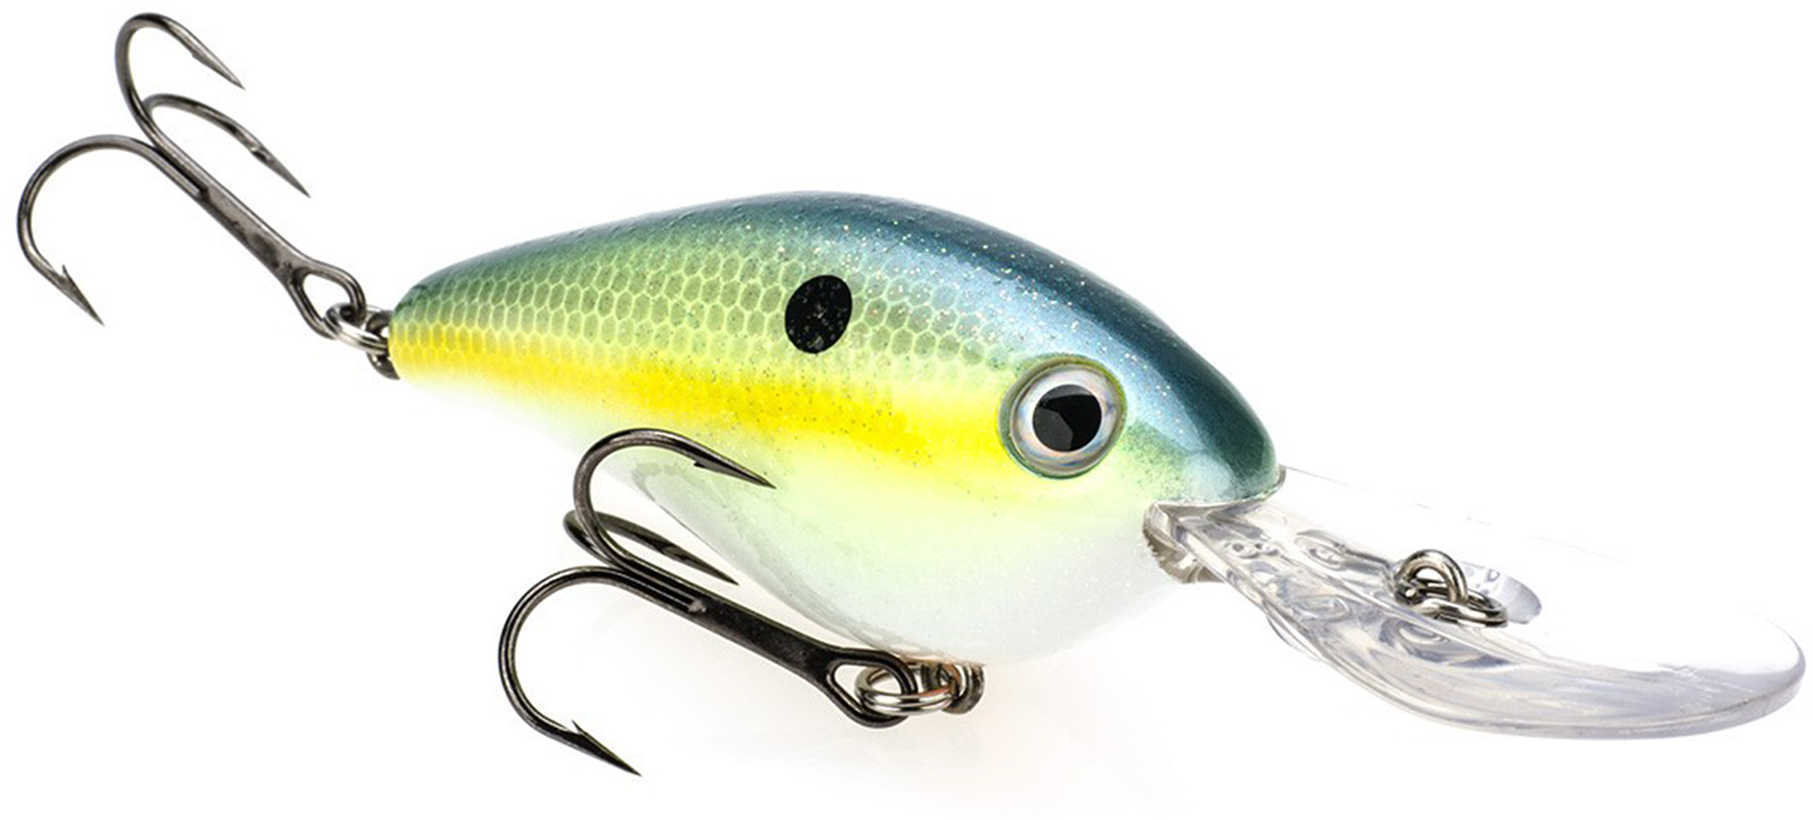 Strike King Lures Series 5 Crankbait 1/2oz 10-13ft Chartreuse Sexy Shad Md#: HC5-538